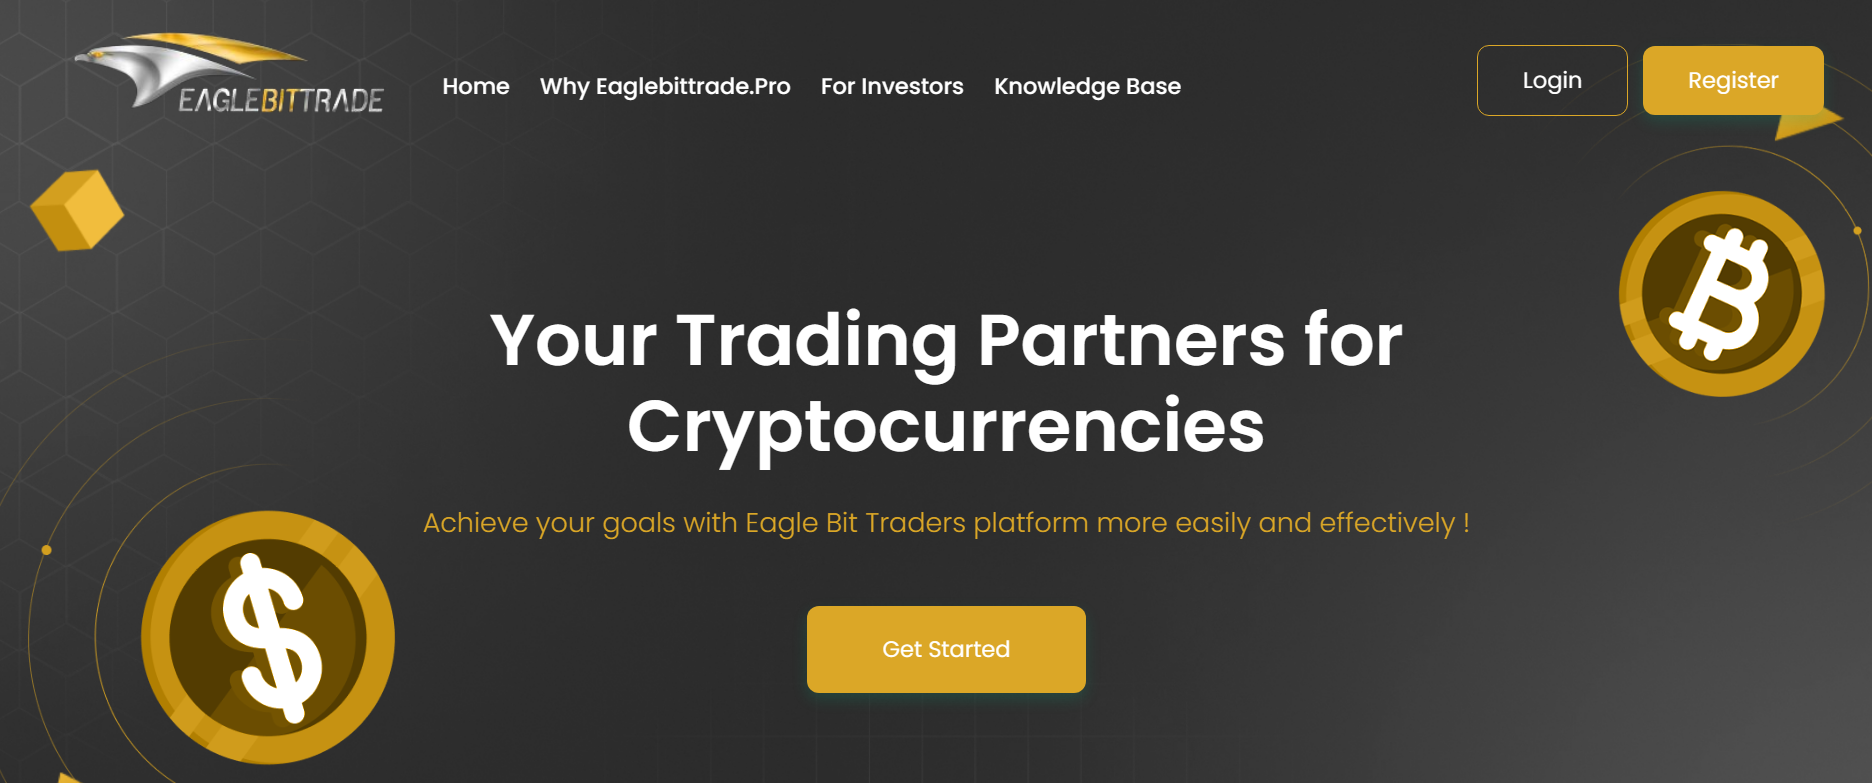 Homepage of Eagle Bit Trade